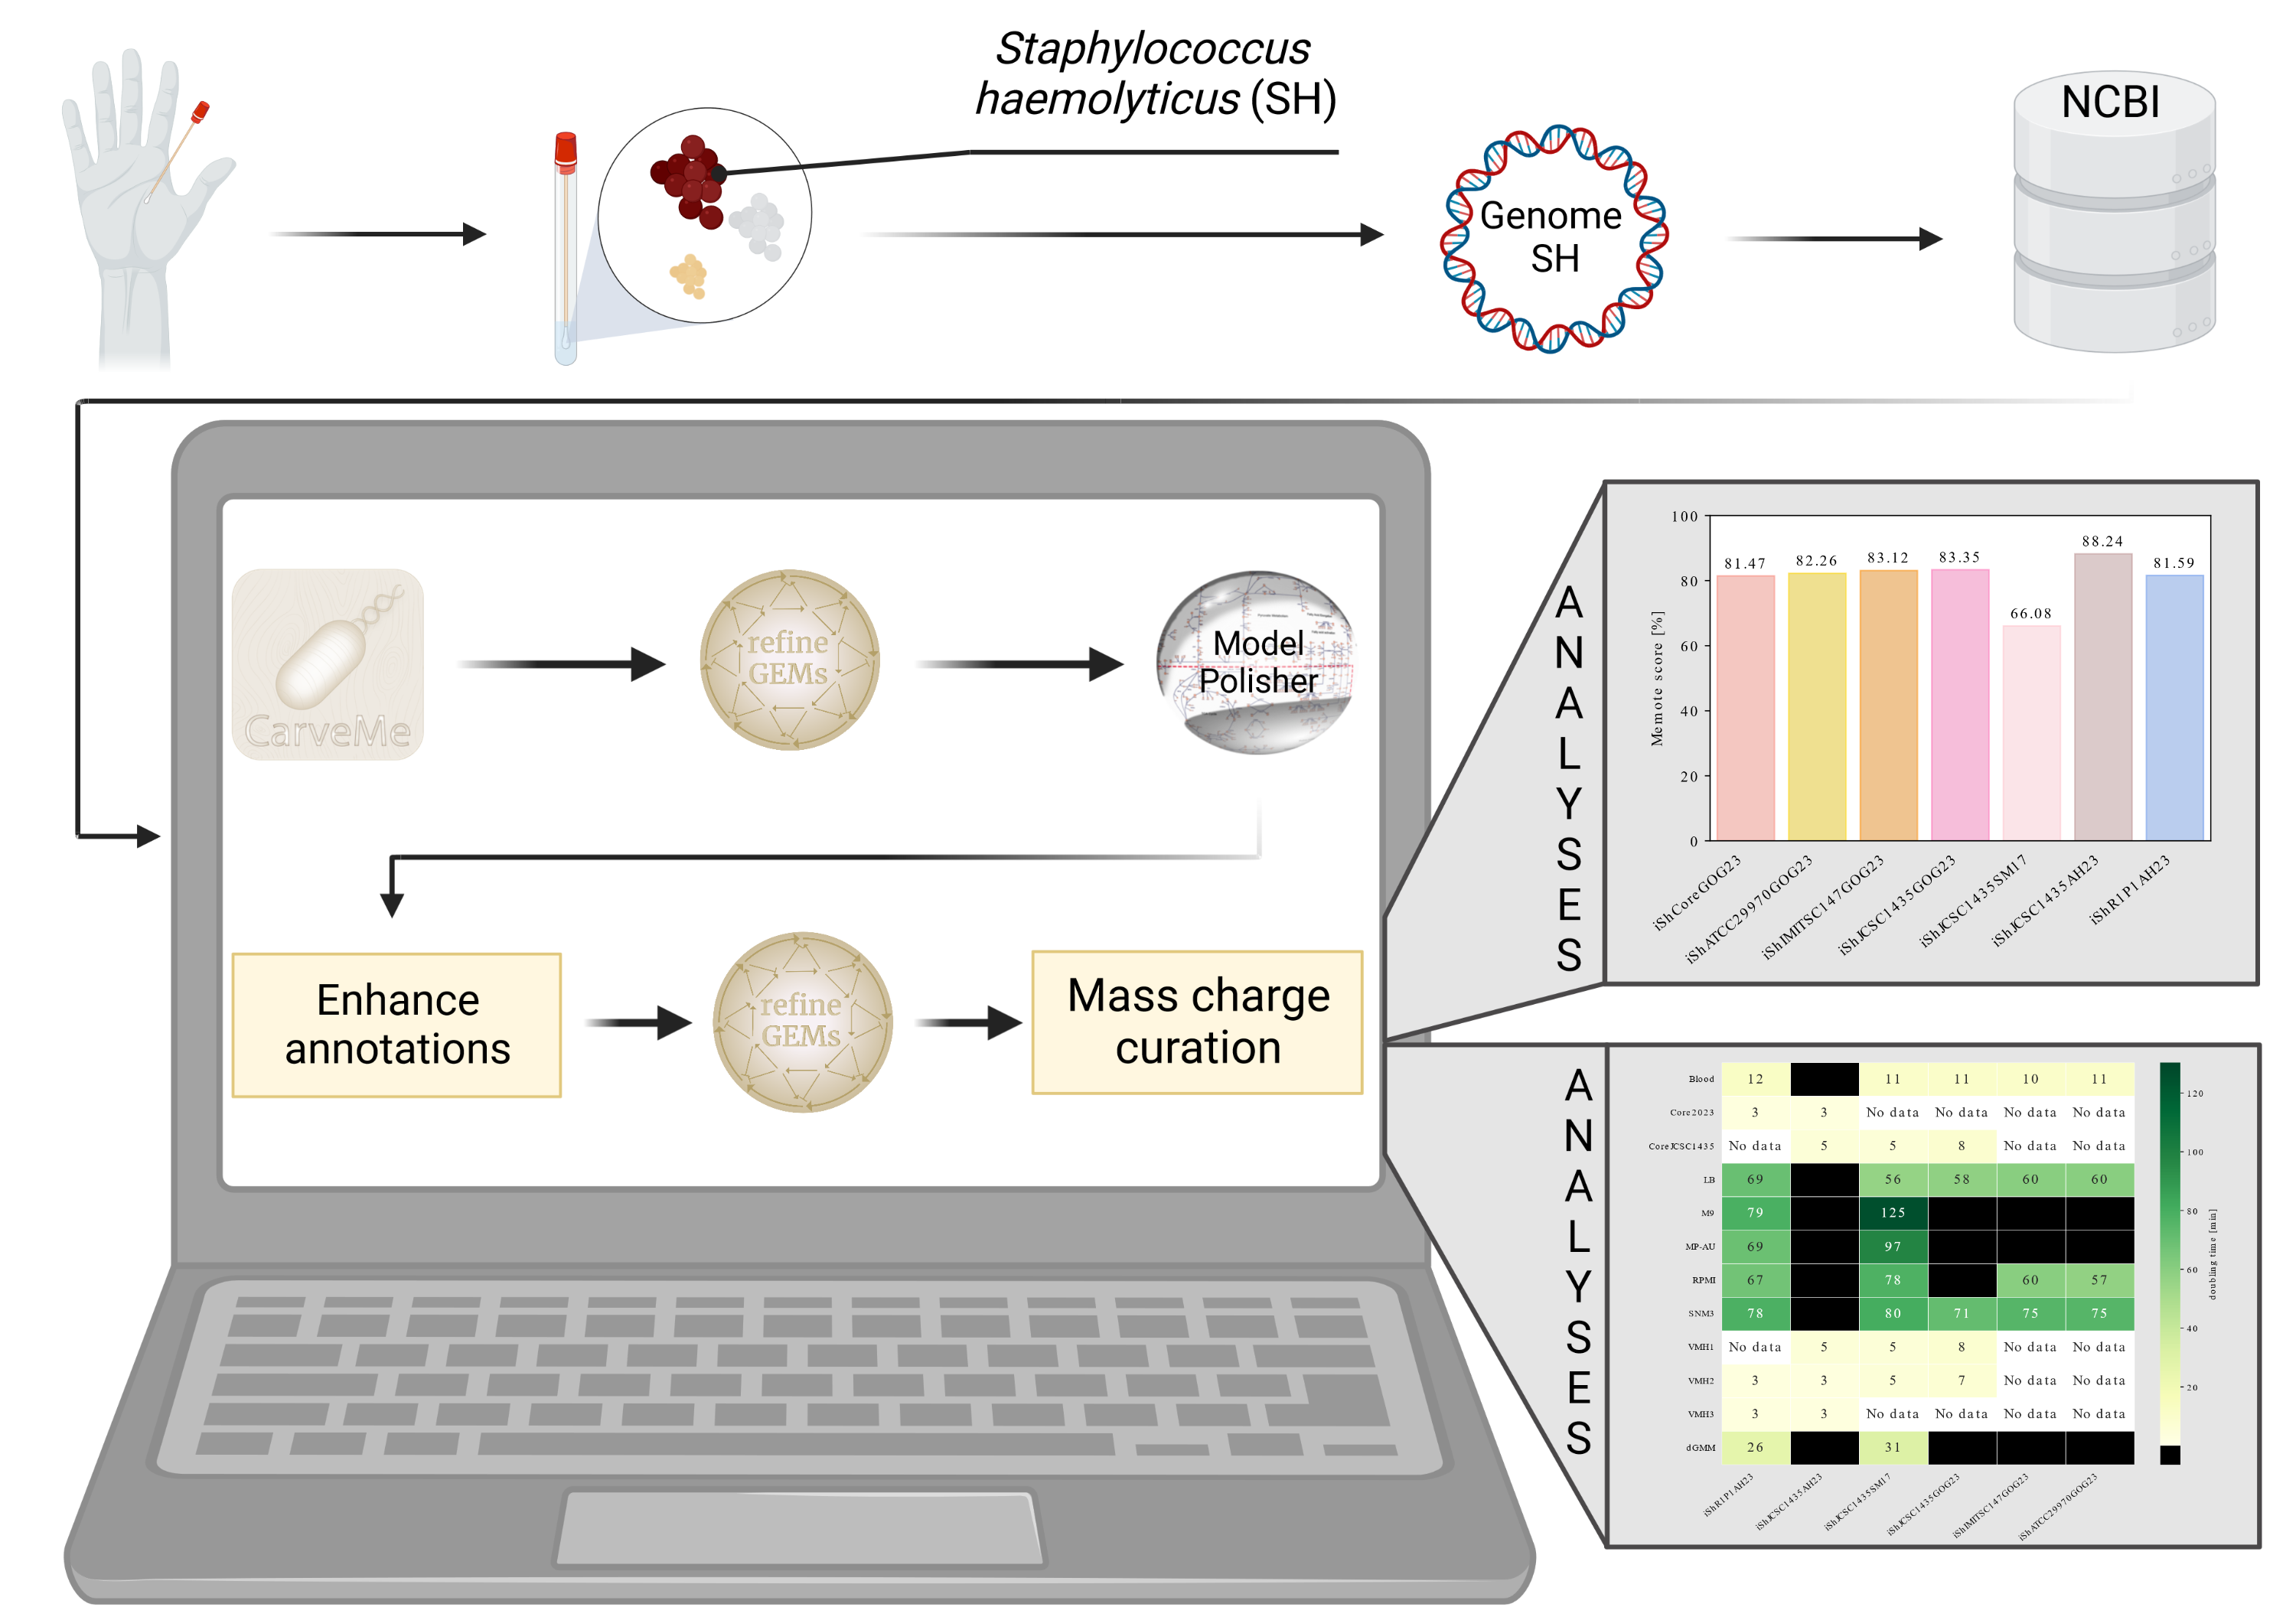 From genome sequence to strain-specific metabolic model of S. haemolyticus.